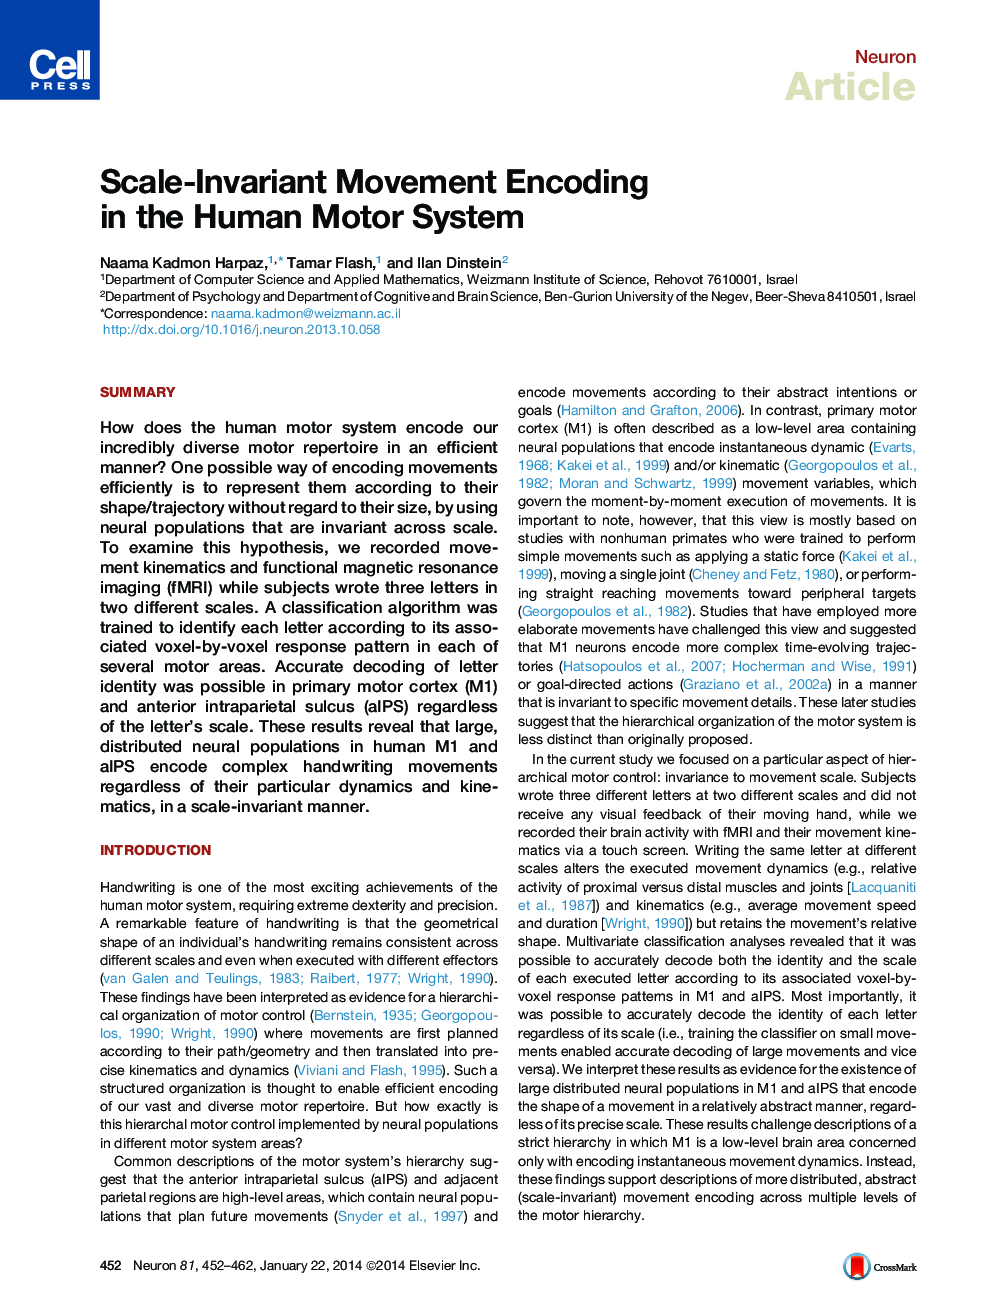 Scale-Invariant Movement Encoding in the Human Motor System